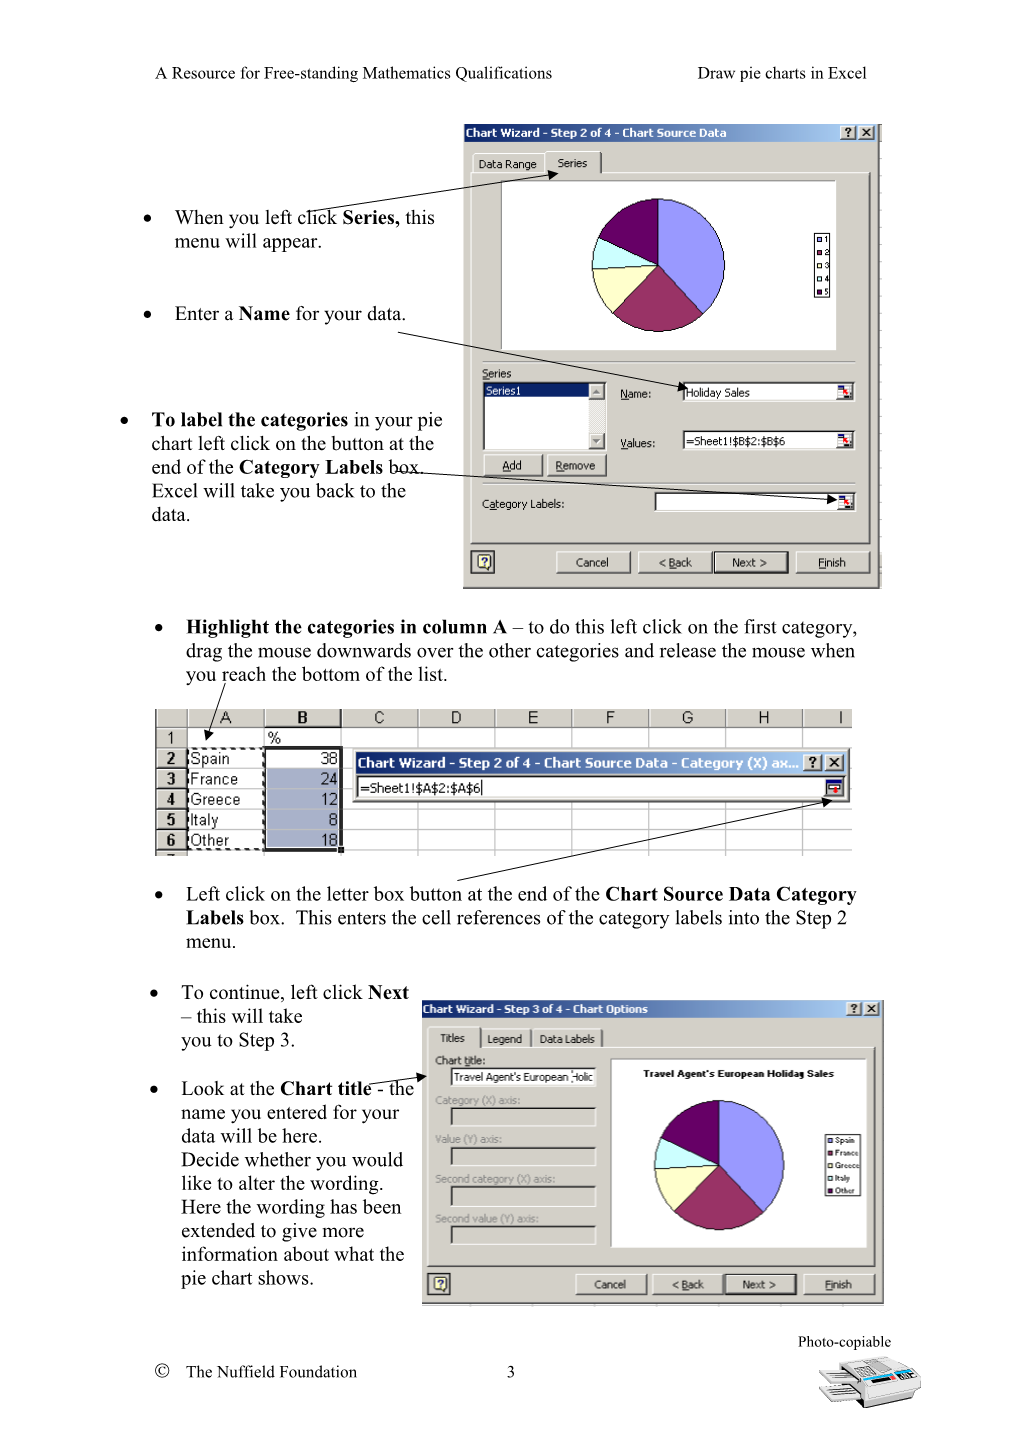 A Resource for Free-Standing Mathematics Qualifications Draw Pie Charts in Excel